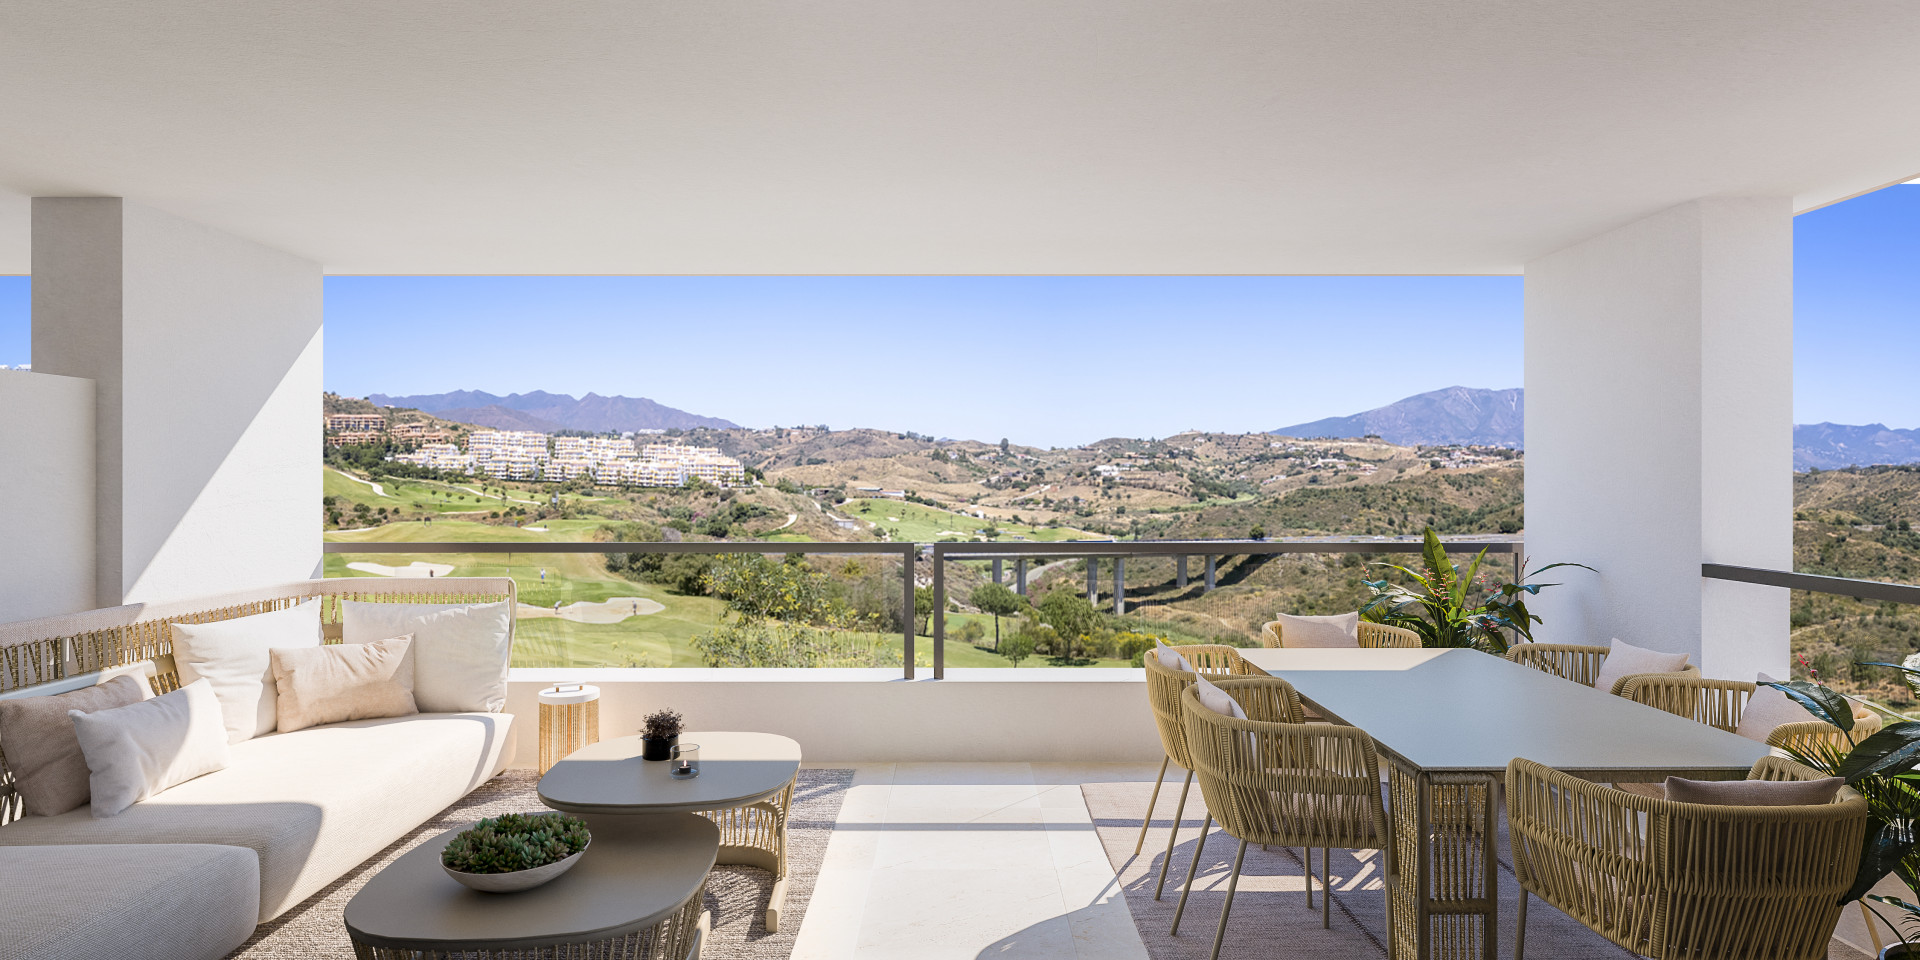 Dream Golf Calanova: Luxury residential project located on the first line of the Calanova golf course in the municipality of Mijas, Malaga. | Image 8